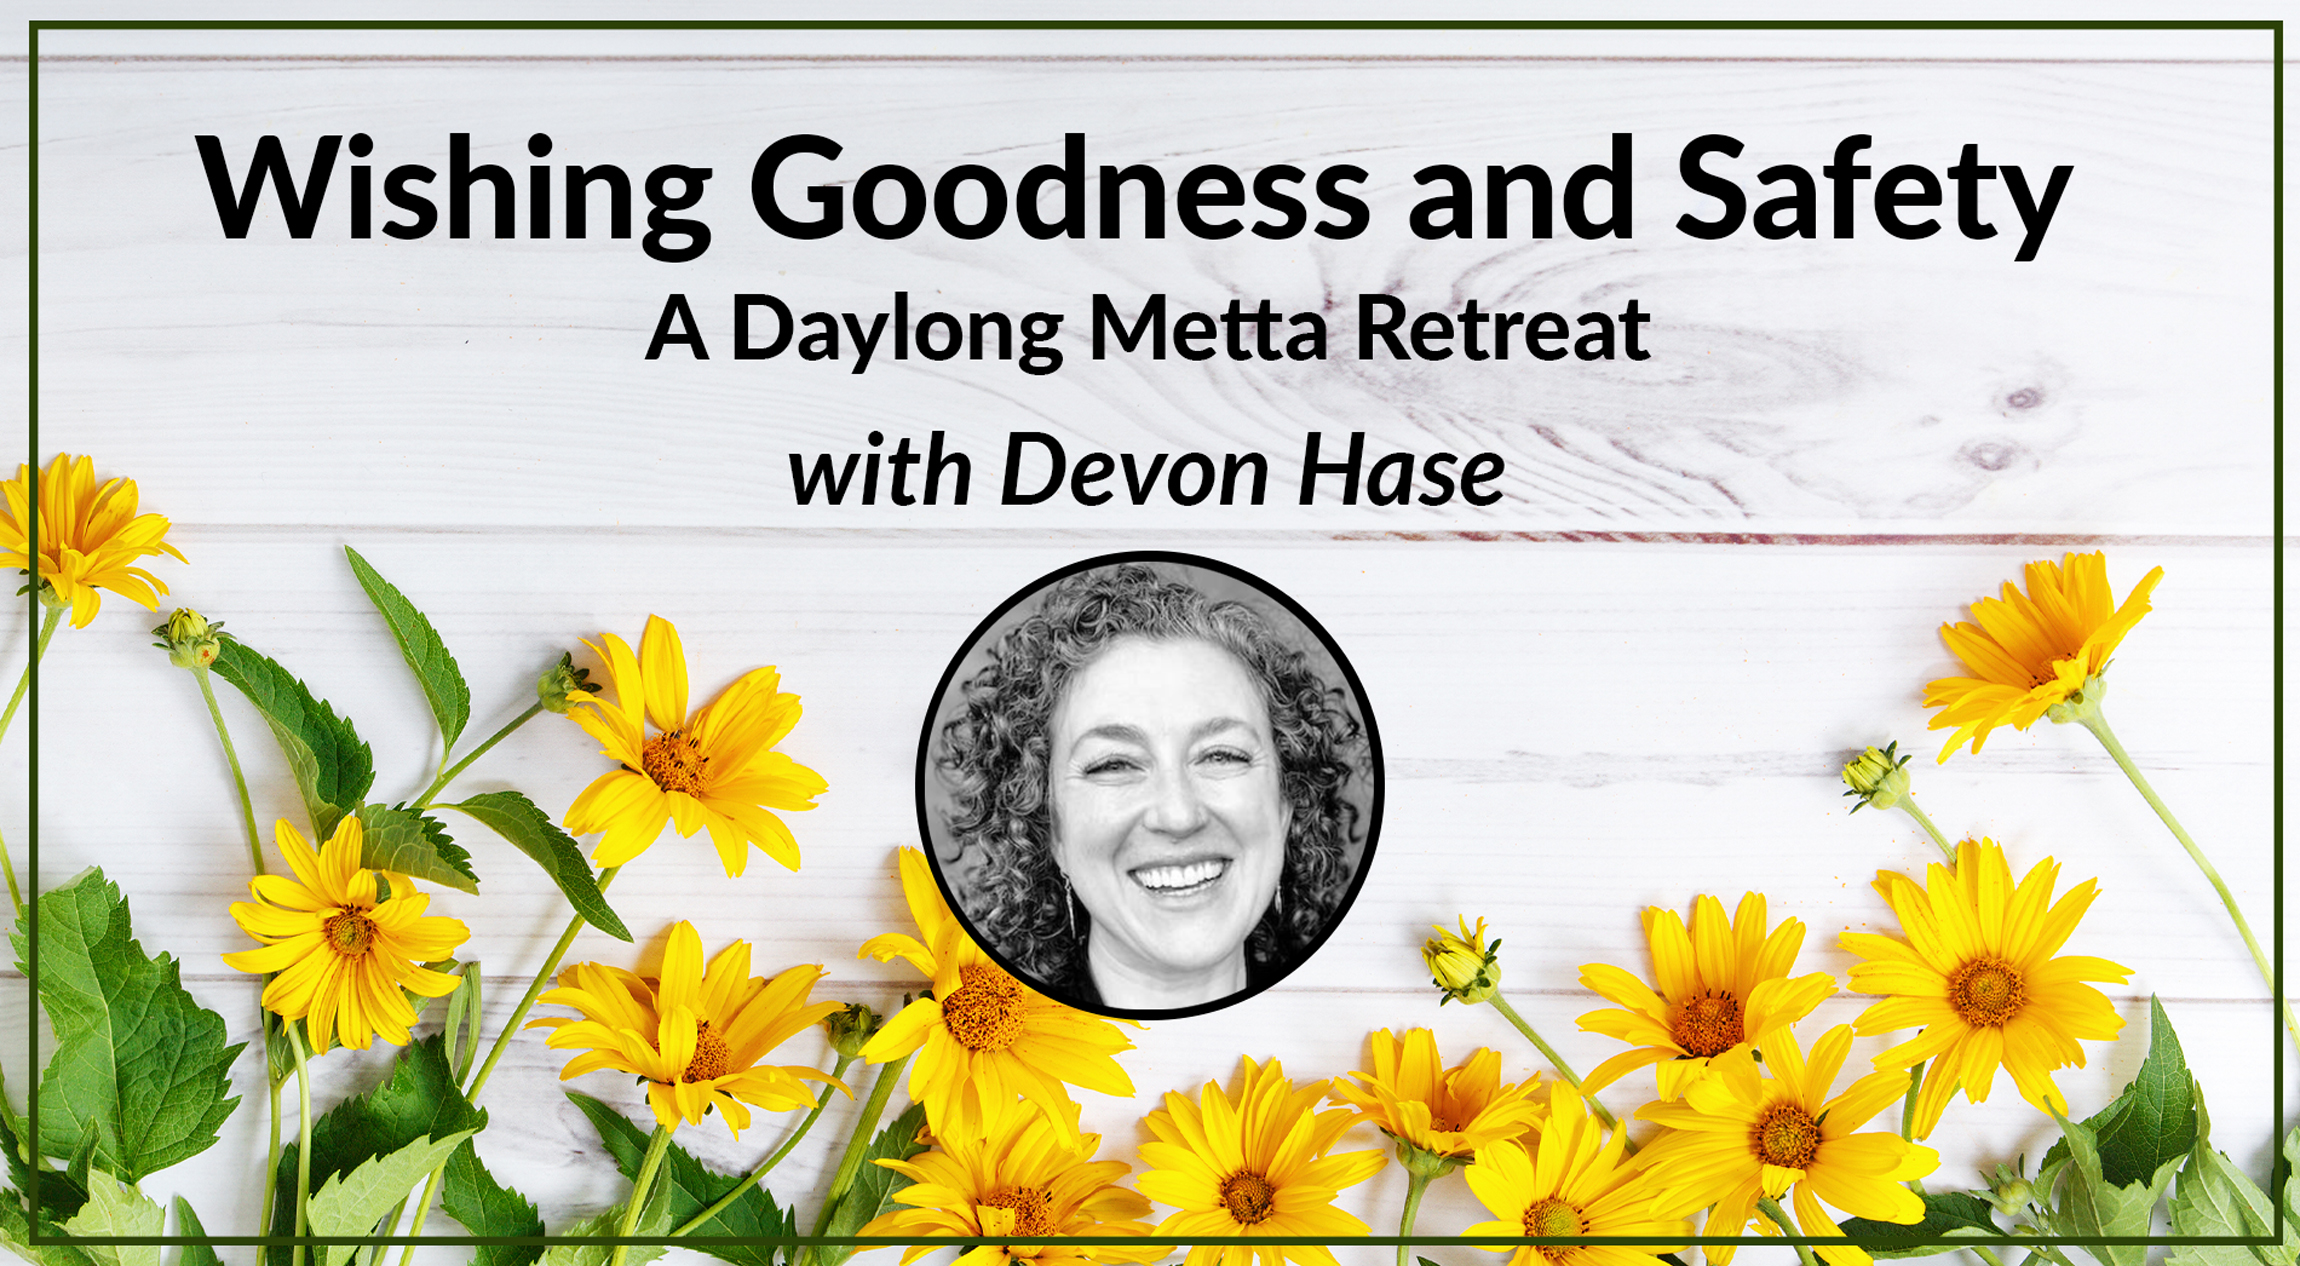 Wishing Goodness and Safety with Devon Hase